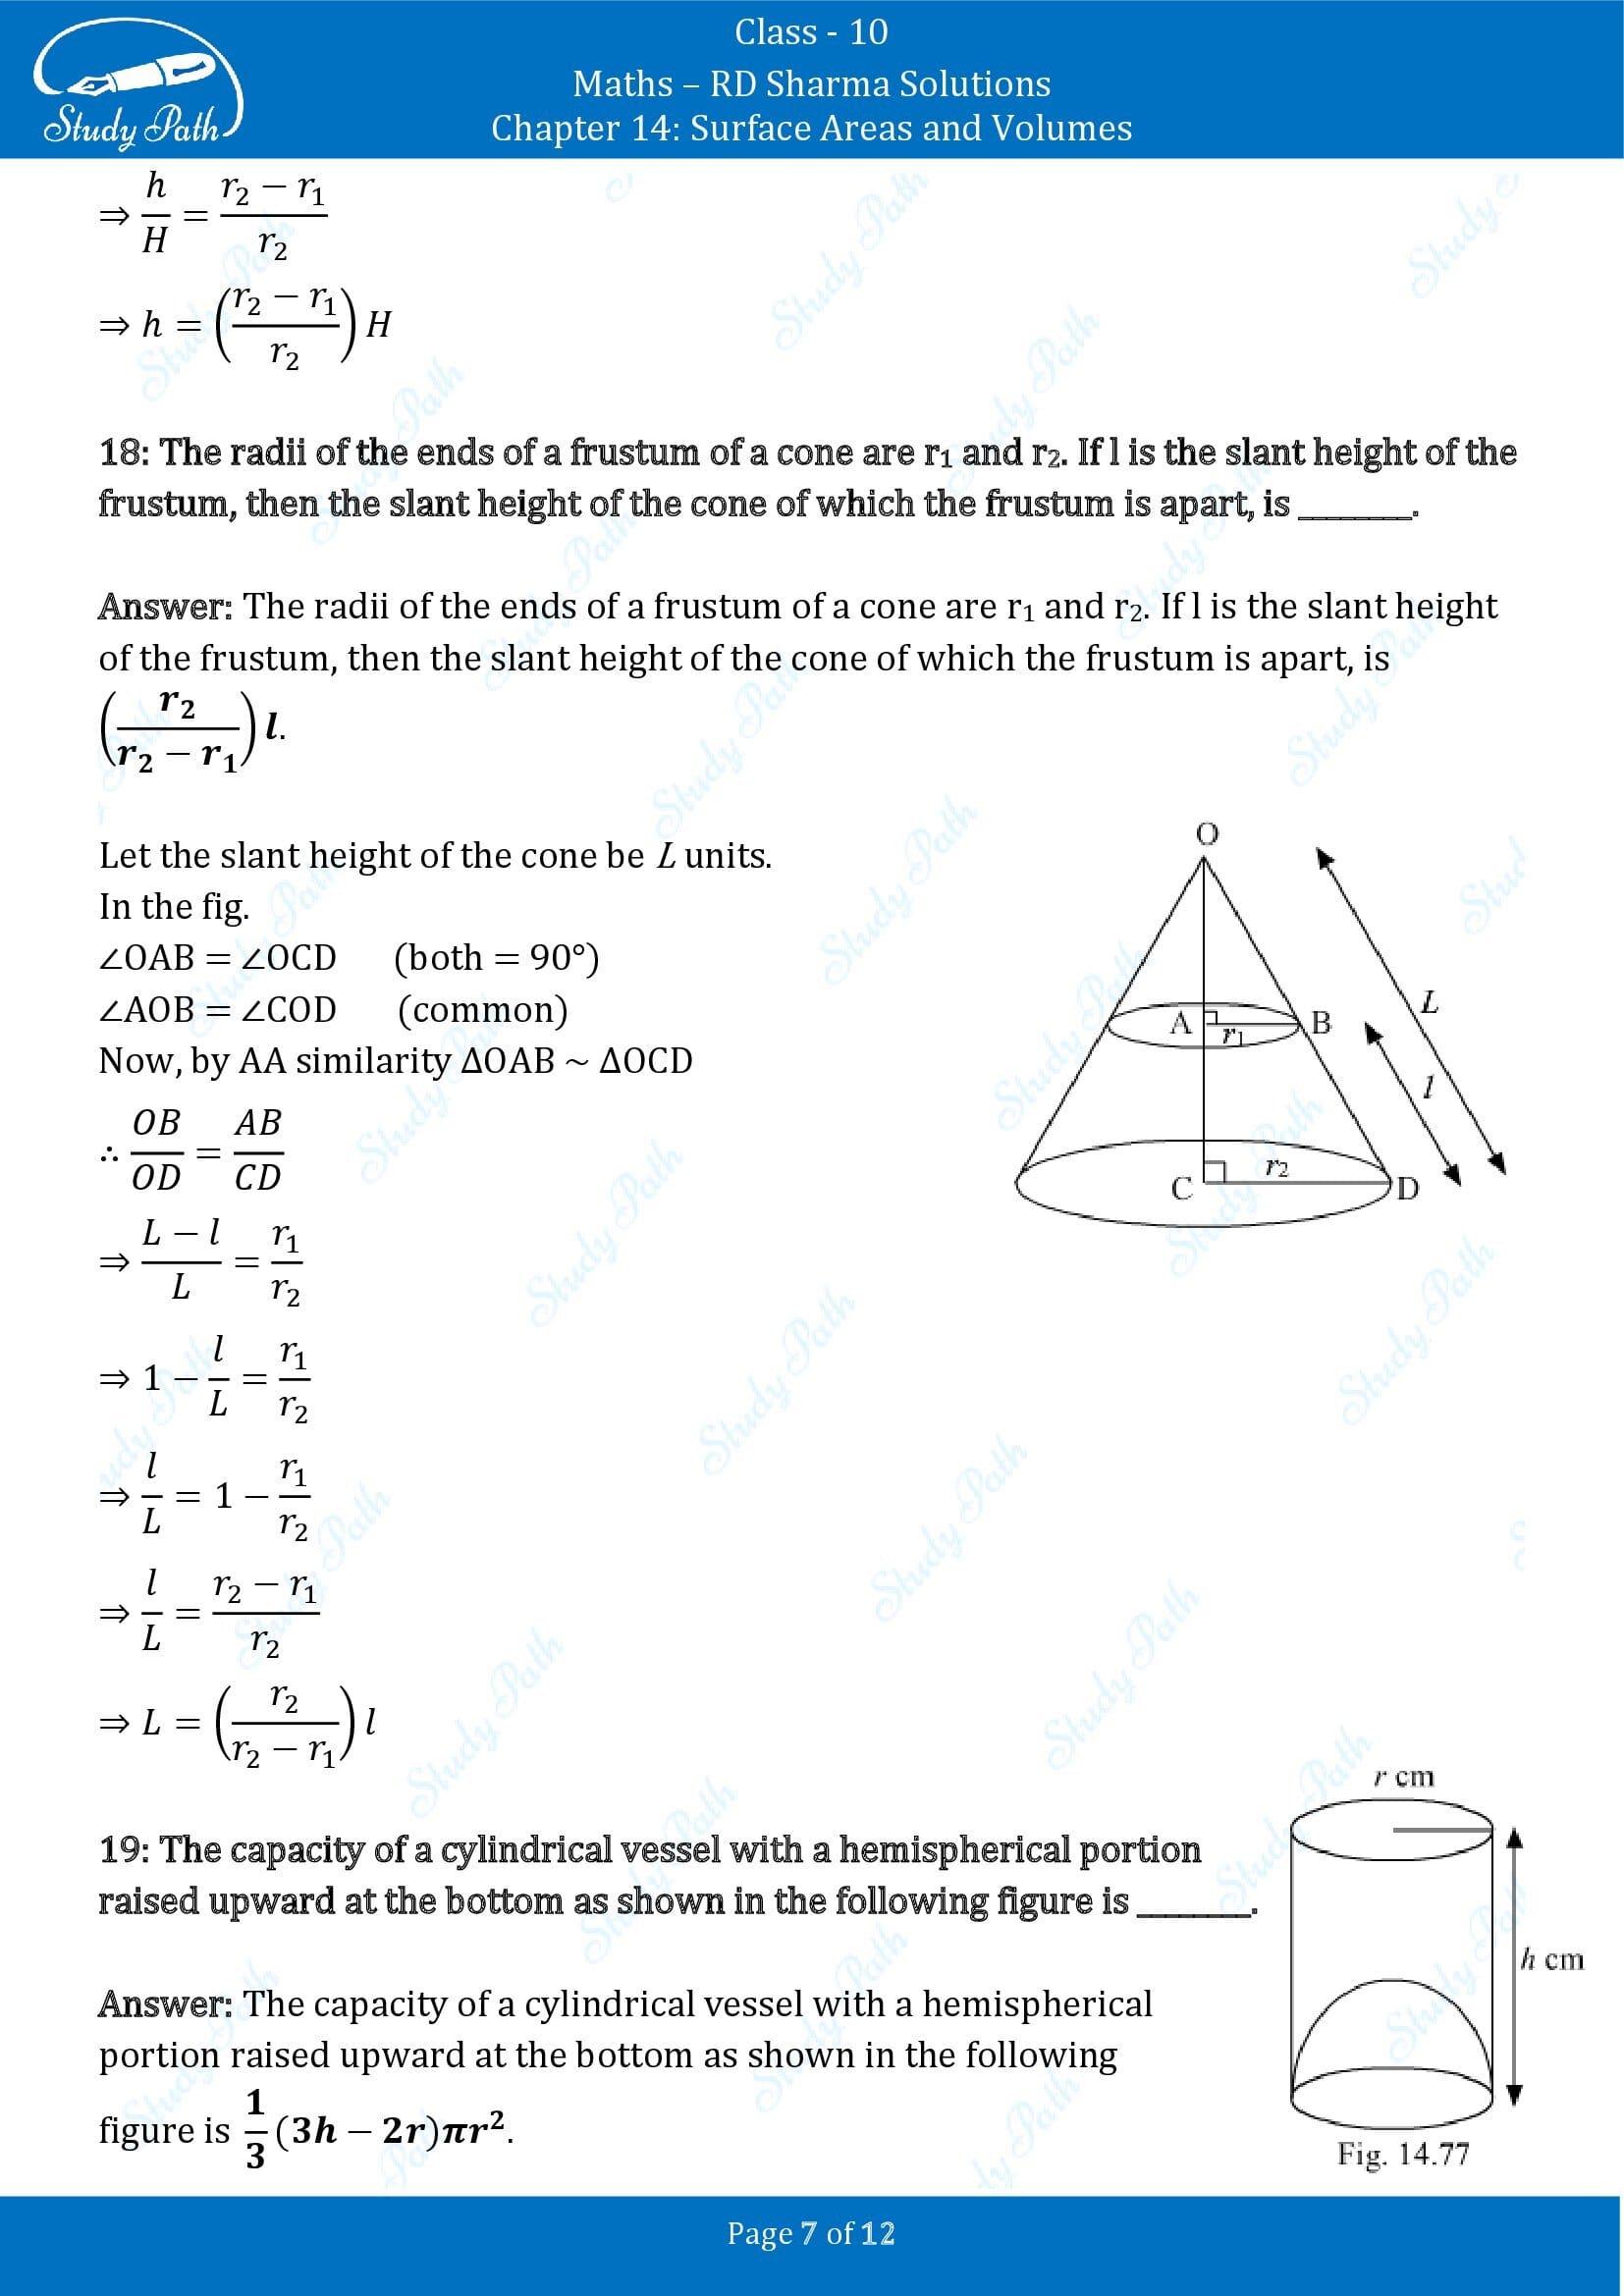 RD Sharma Solutions Class 10 Chapter 14 Surface Areas and Volumes Fill in the Blank Type Questions FBQs 00007